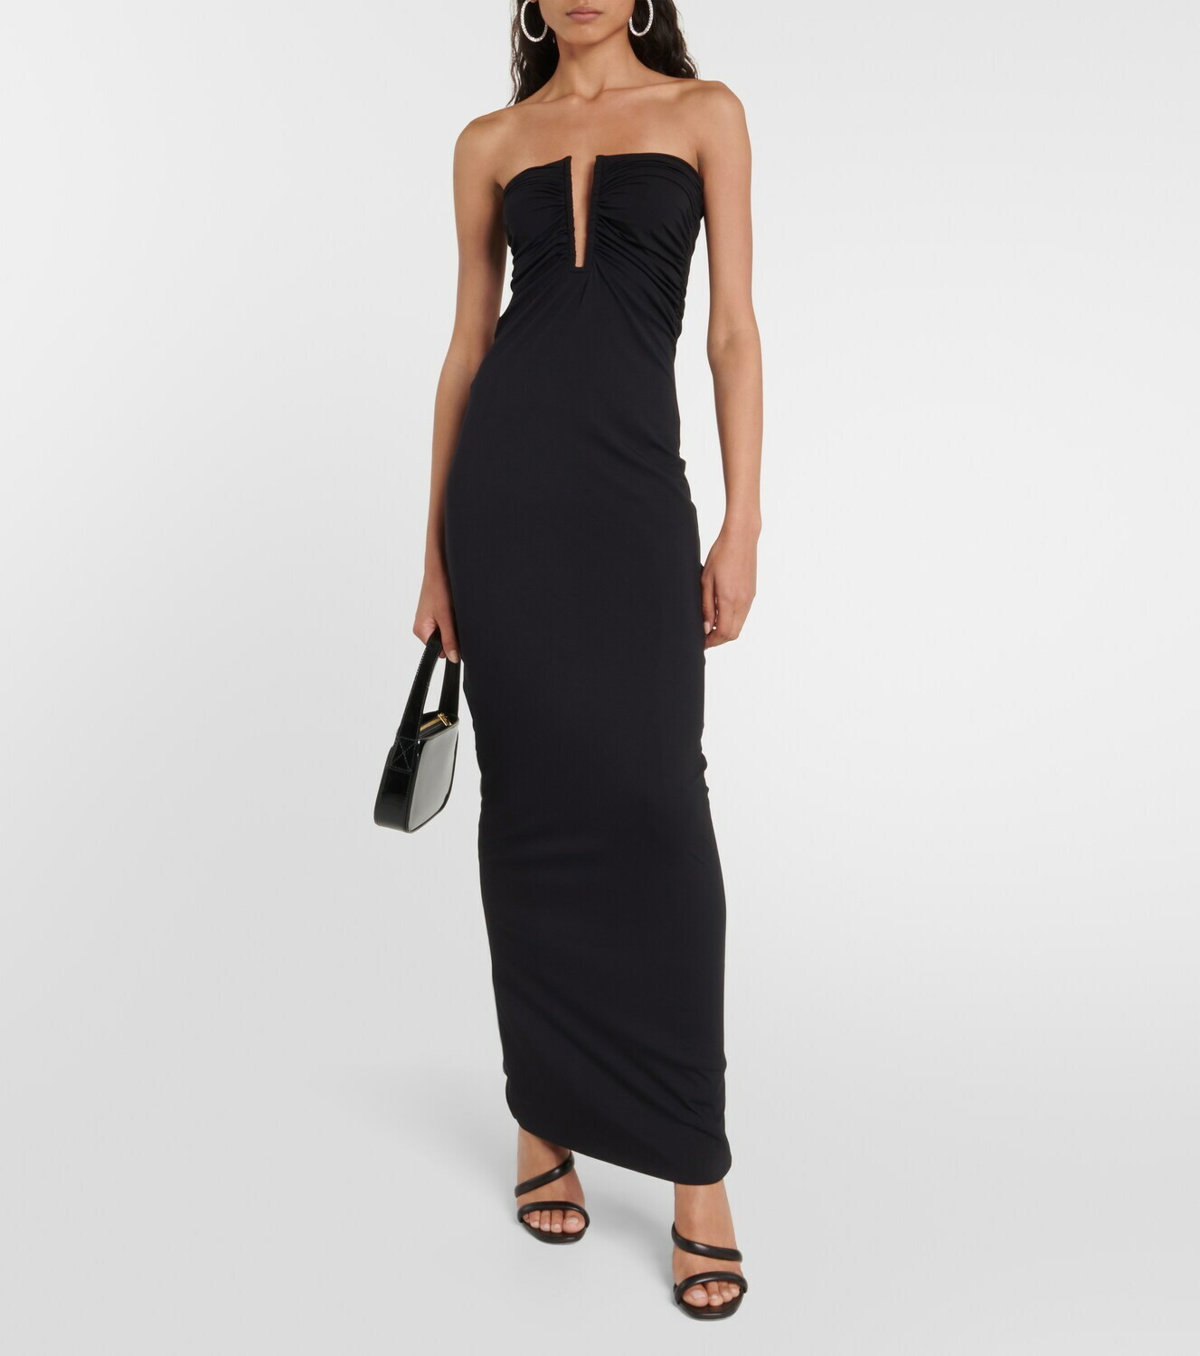 Wolford x N21 ruched strapless maxi dress Wolford